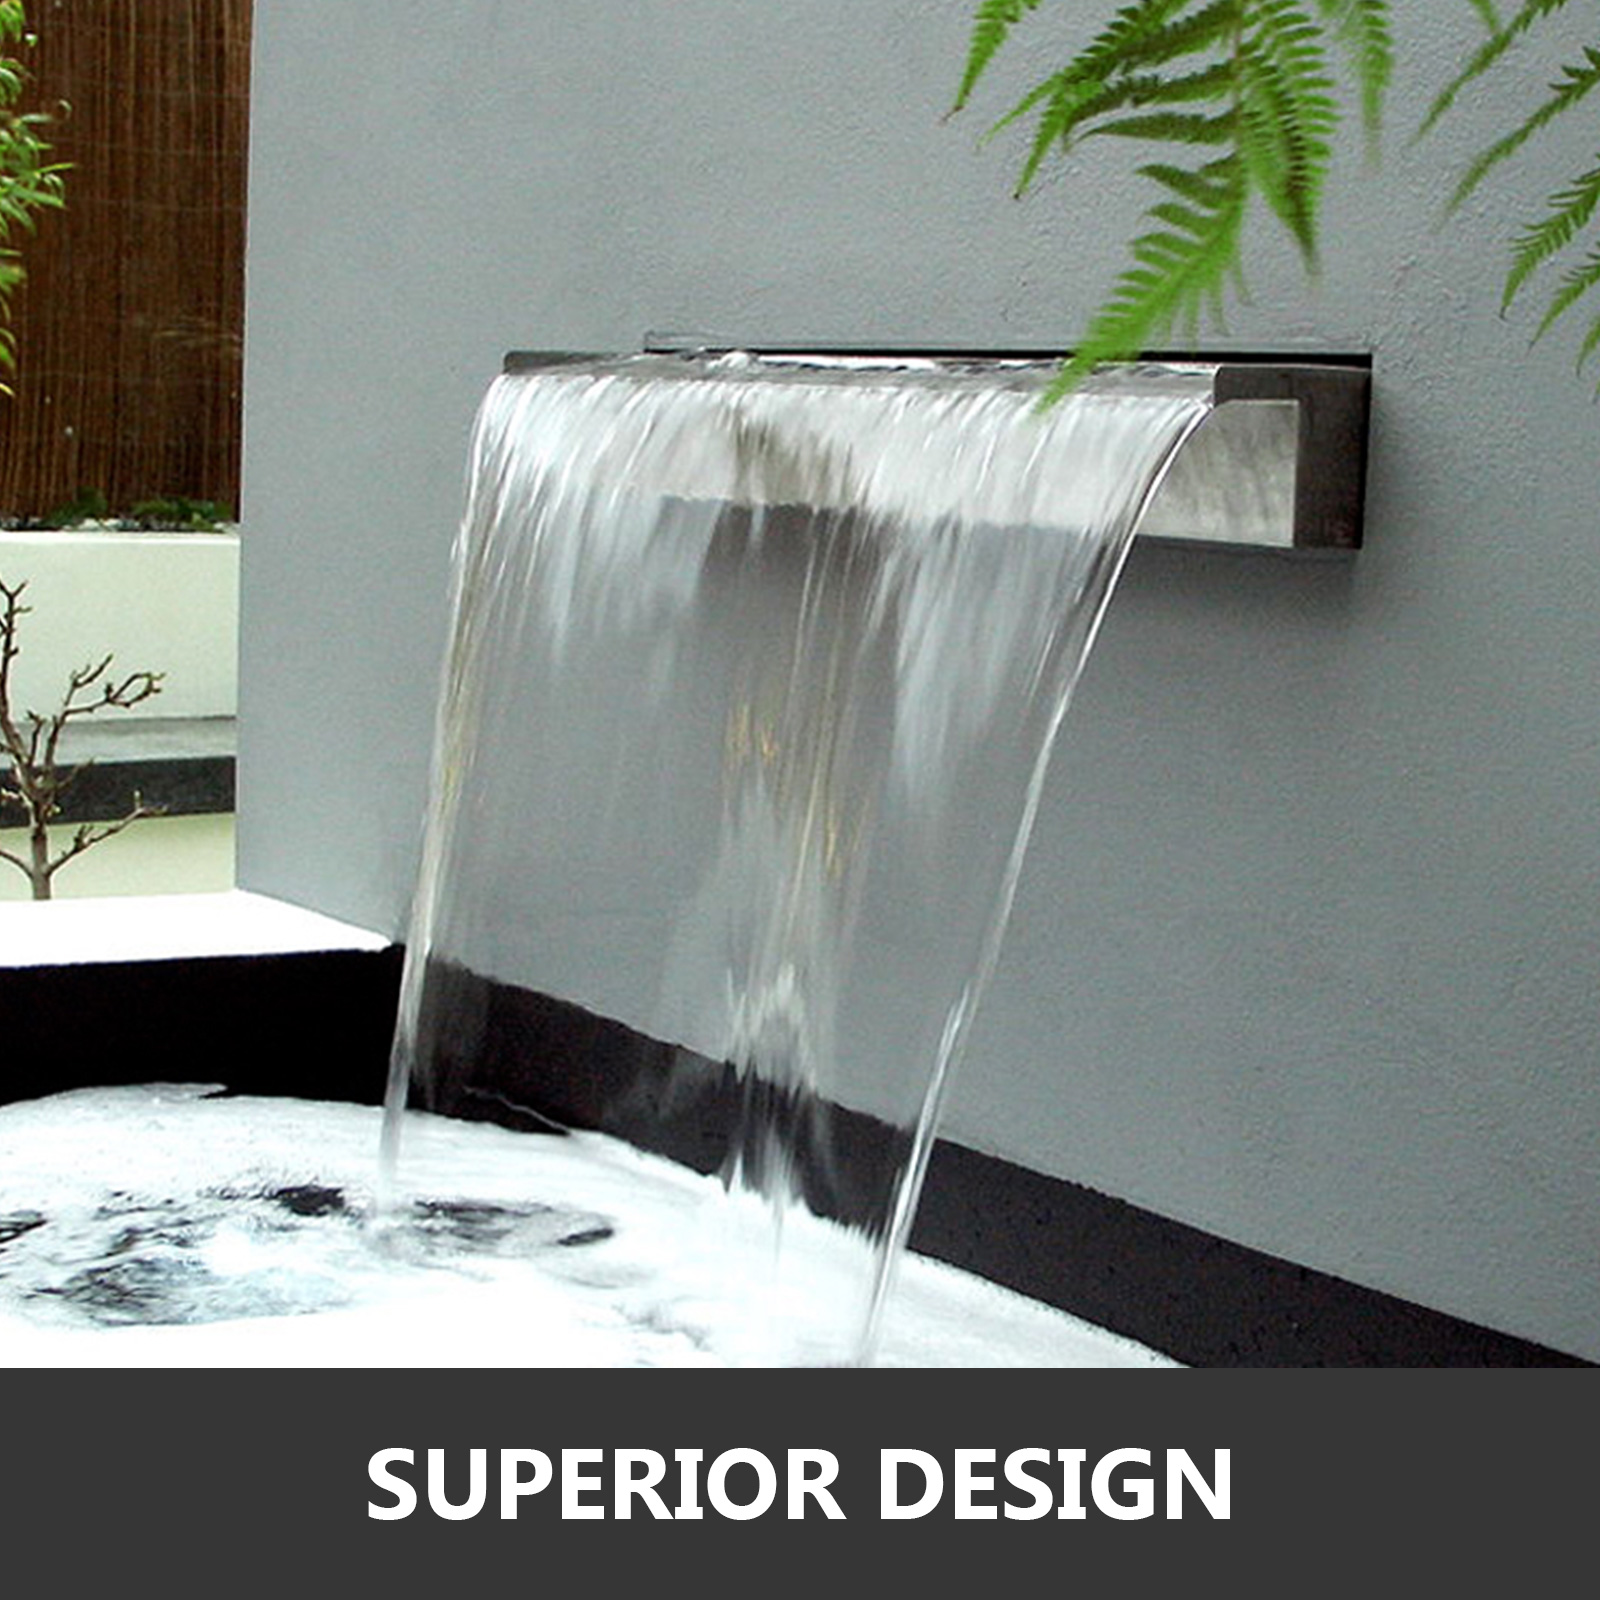 Waterfall Pool Fountain Stainless Steel W/ Pipe Connector Spillway Garden Outdoor Pond Rectangular Swimming Pool Fountain